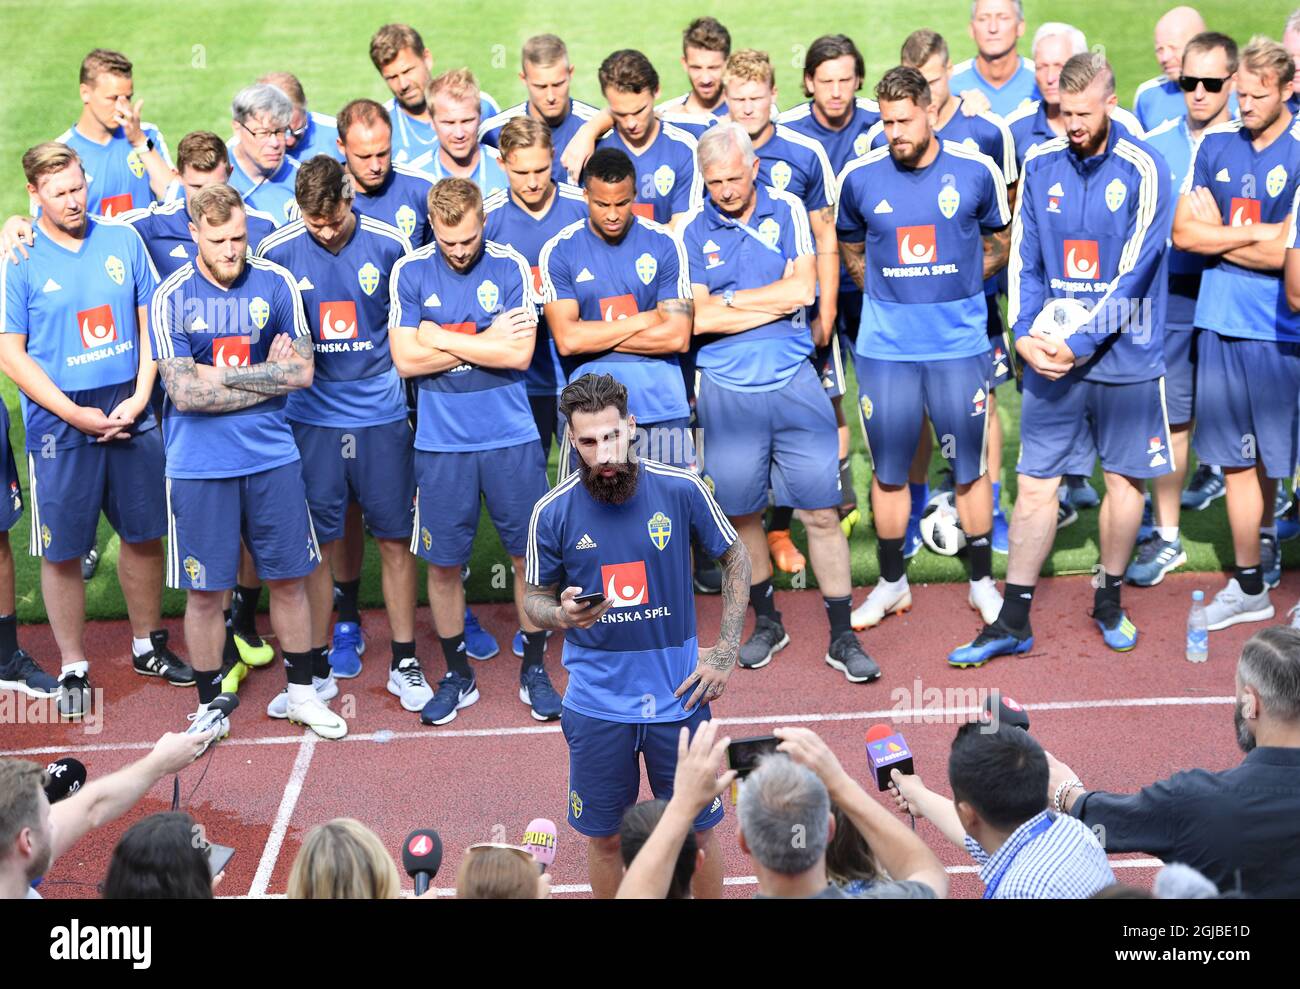 Swedish national soccer player Jimmy Durmaz speaks during a press conference, backed by his team, in connection to the team's training session at Spartak Stadium in Gelendzjik on June 24, 2018, the day after the World Cup group match against Germany. Durmaz was harrased wigh racist comments on internet after the loss  against Germany.  Stock Photo